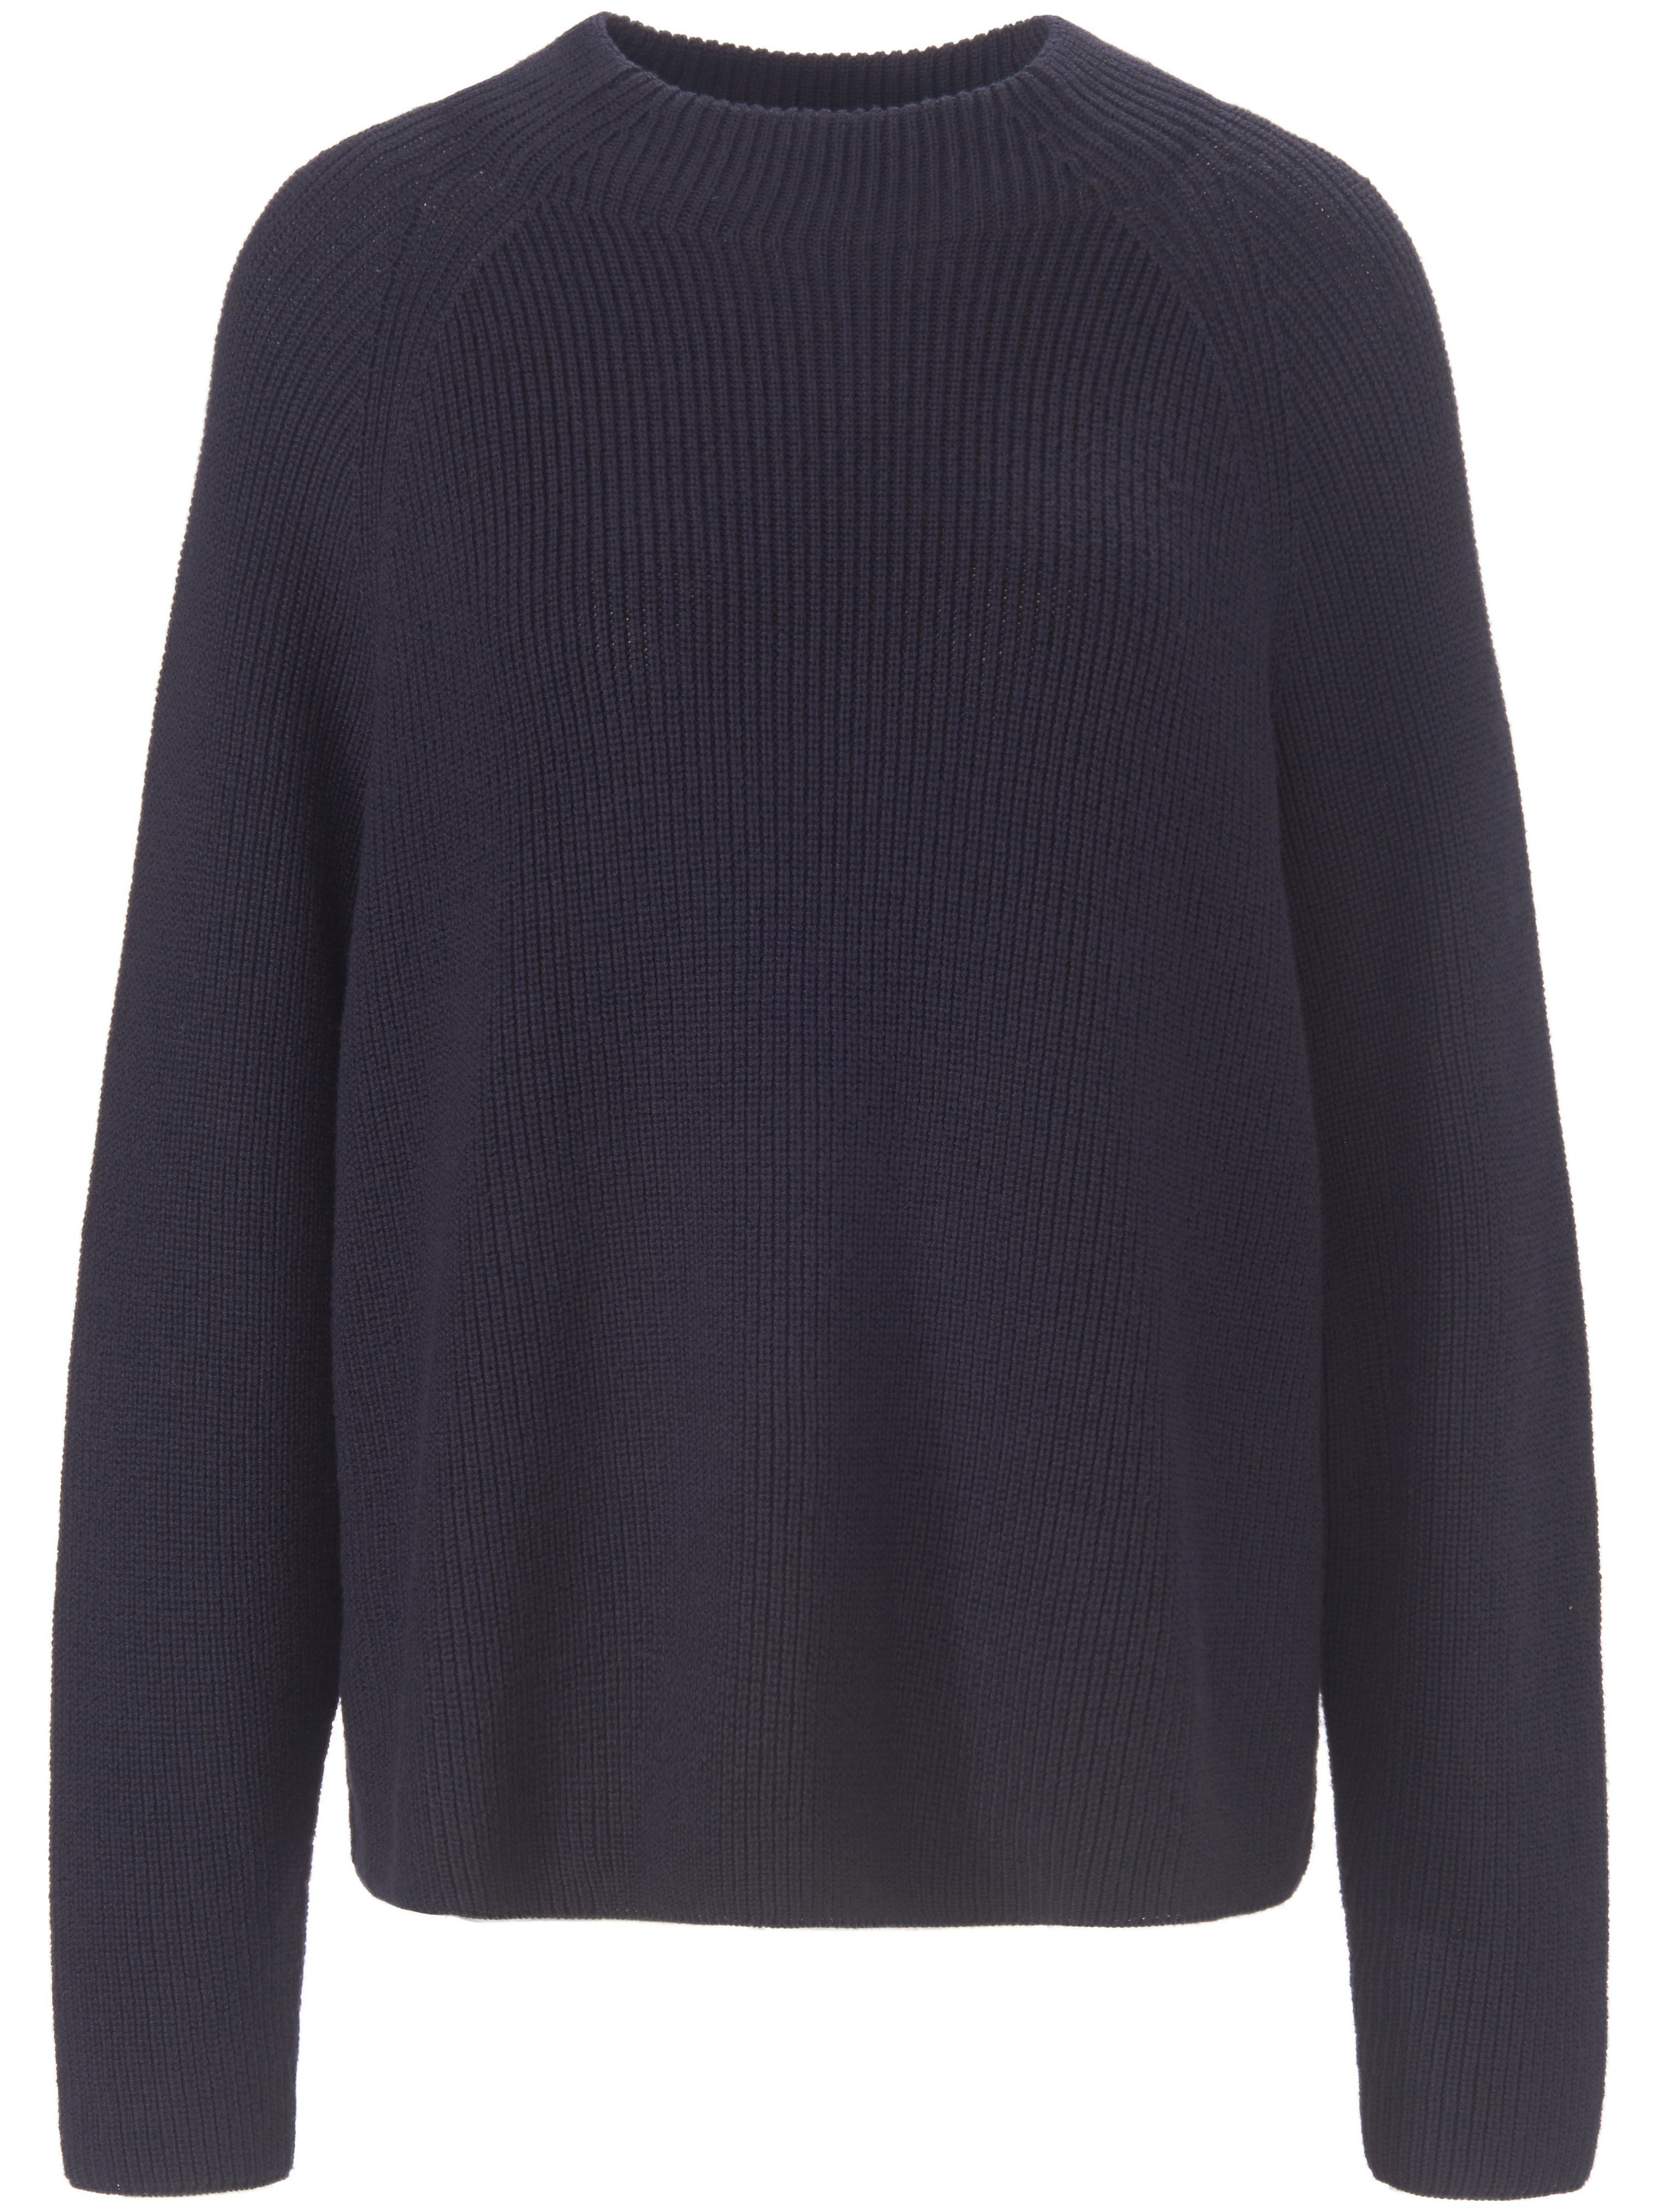 Le pull tricot  Windsor bleu taille 42